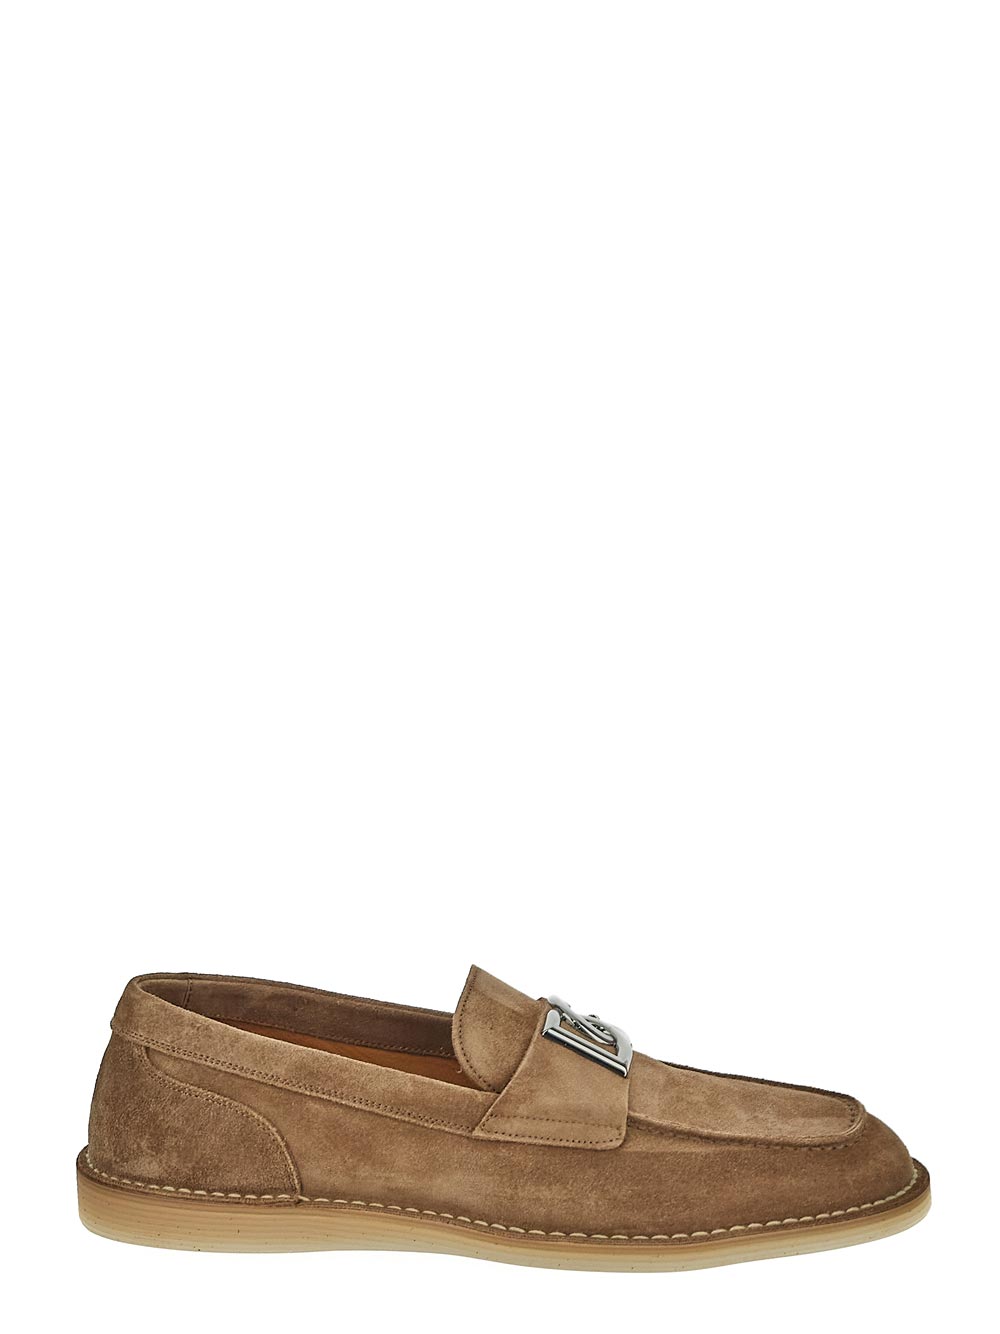 Dolce & Gabbana Suede Loafers